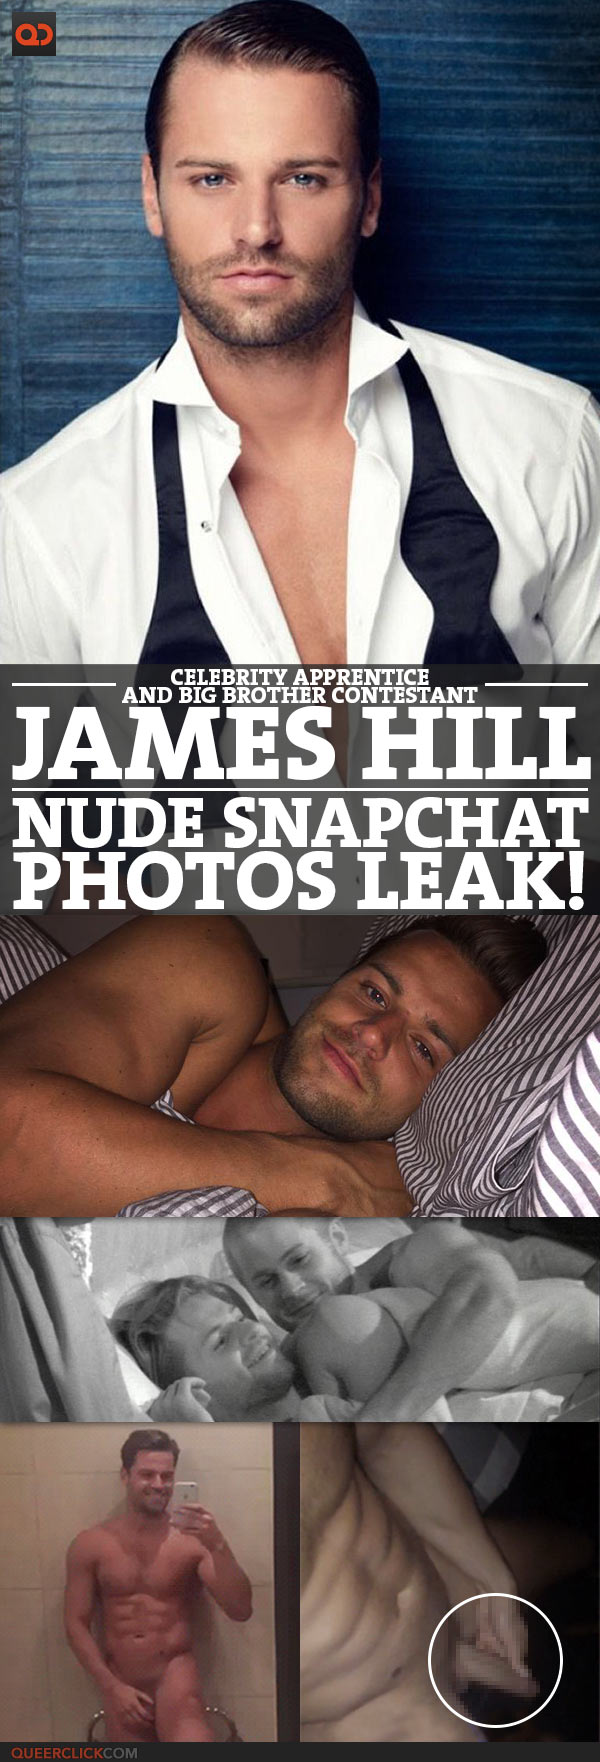 James Hill, Celebrity Apprentice and Big Brother Contestant, Nude Snapchat Photos Leak!